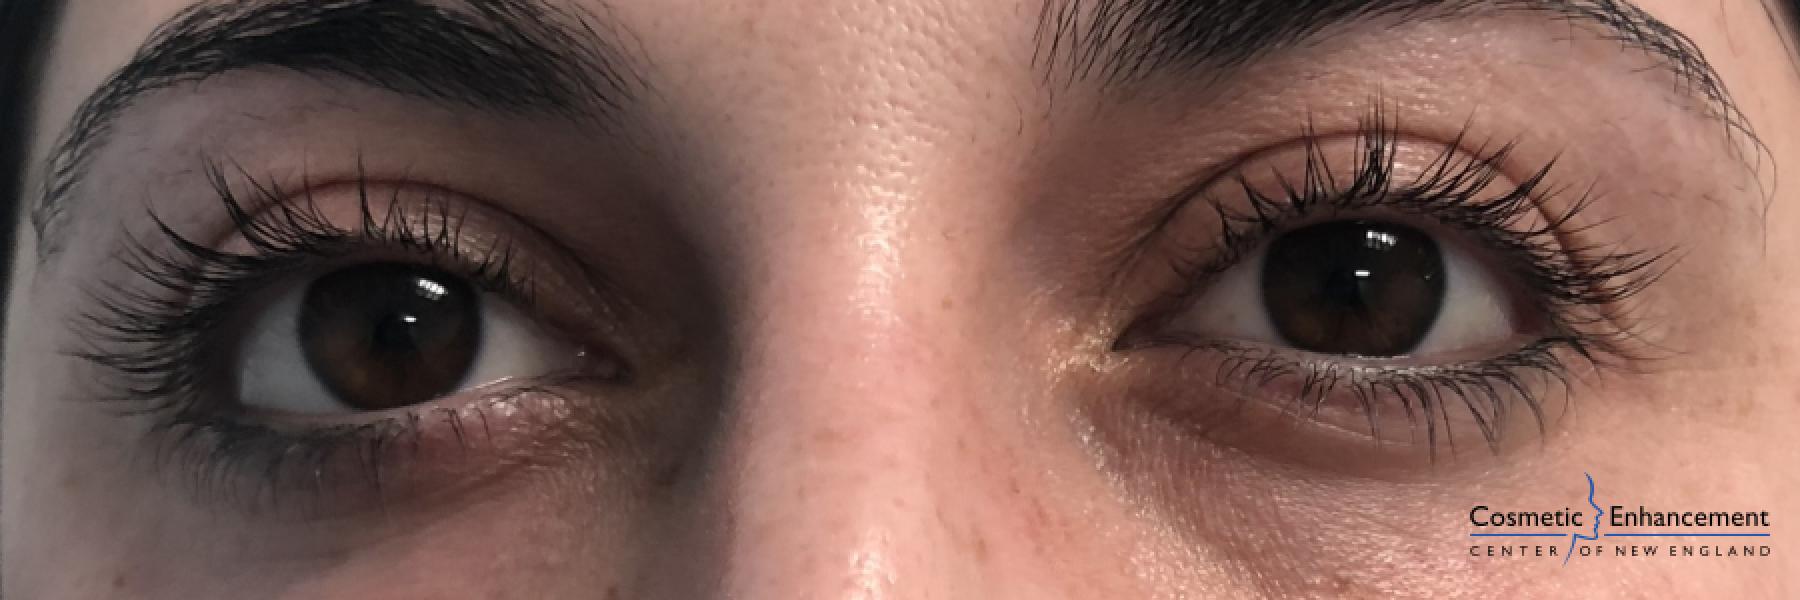 Lash Lift And Tint: Patient 1 - Before 1